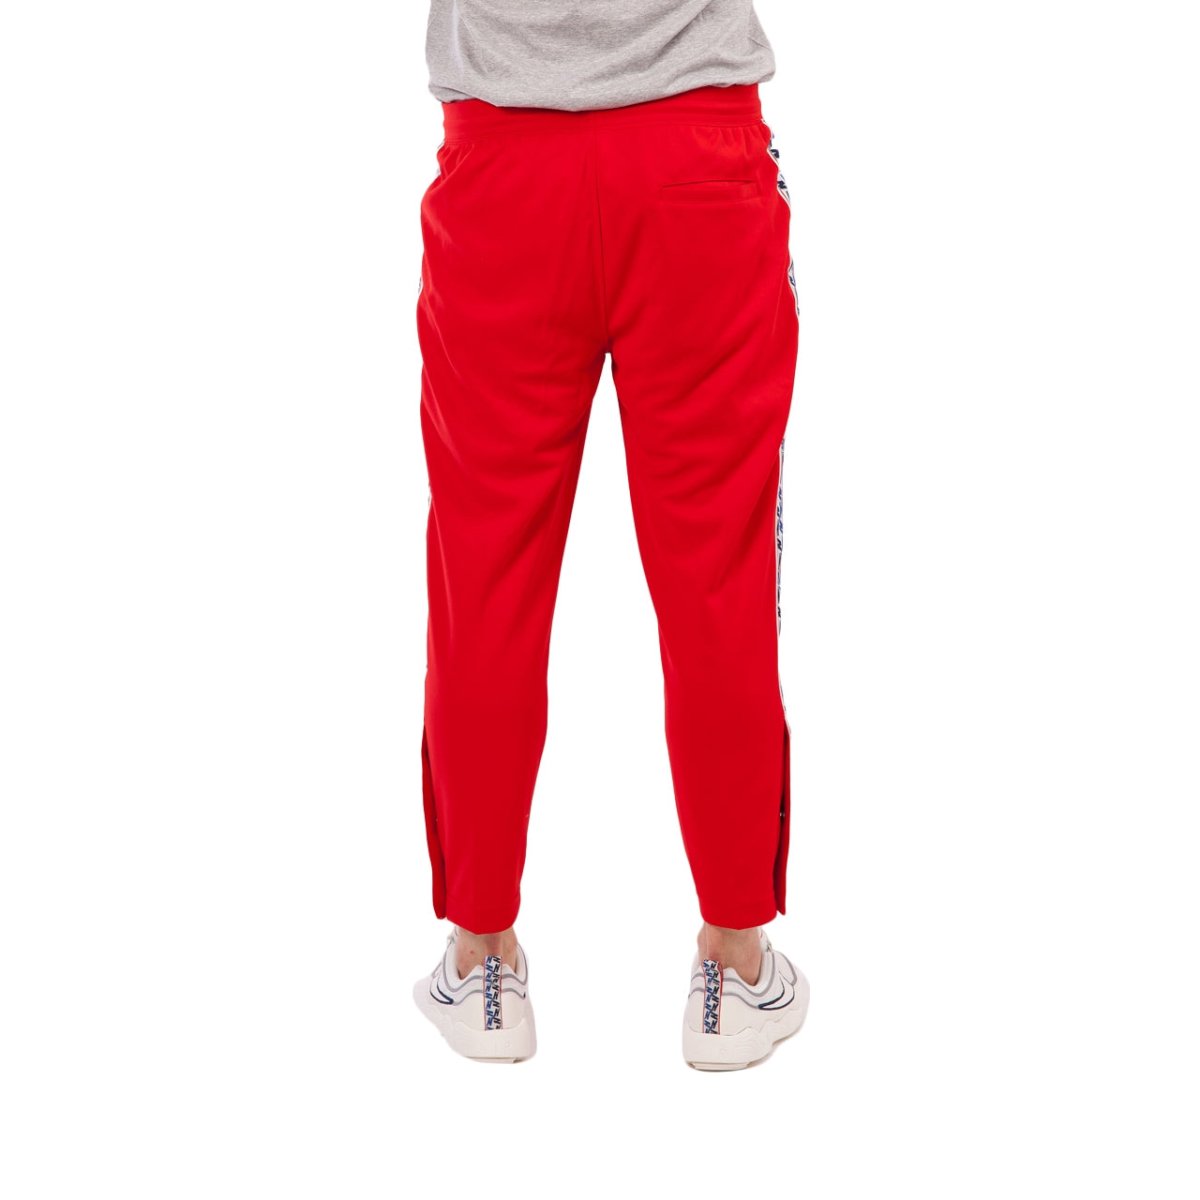 Nike NSW Taped Poly Pants (Rot / Weiß)  - Allike Store